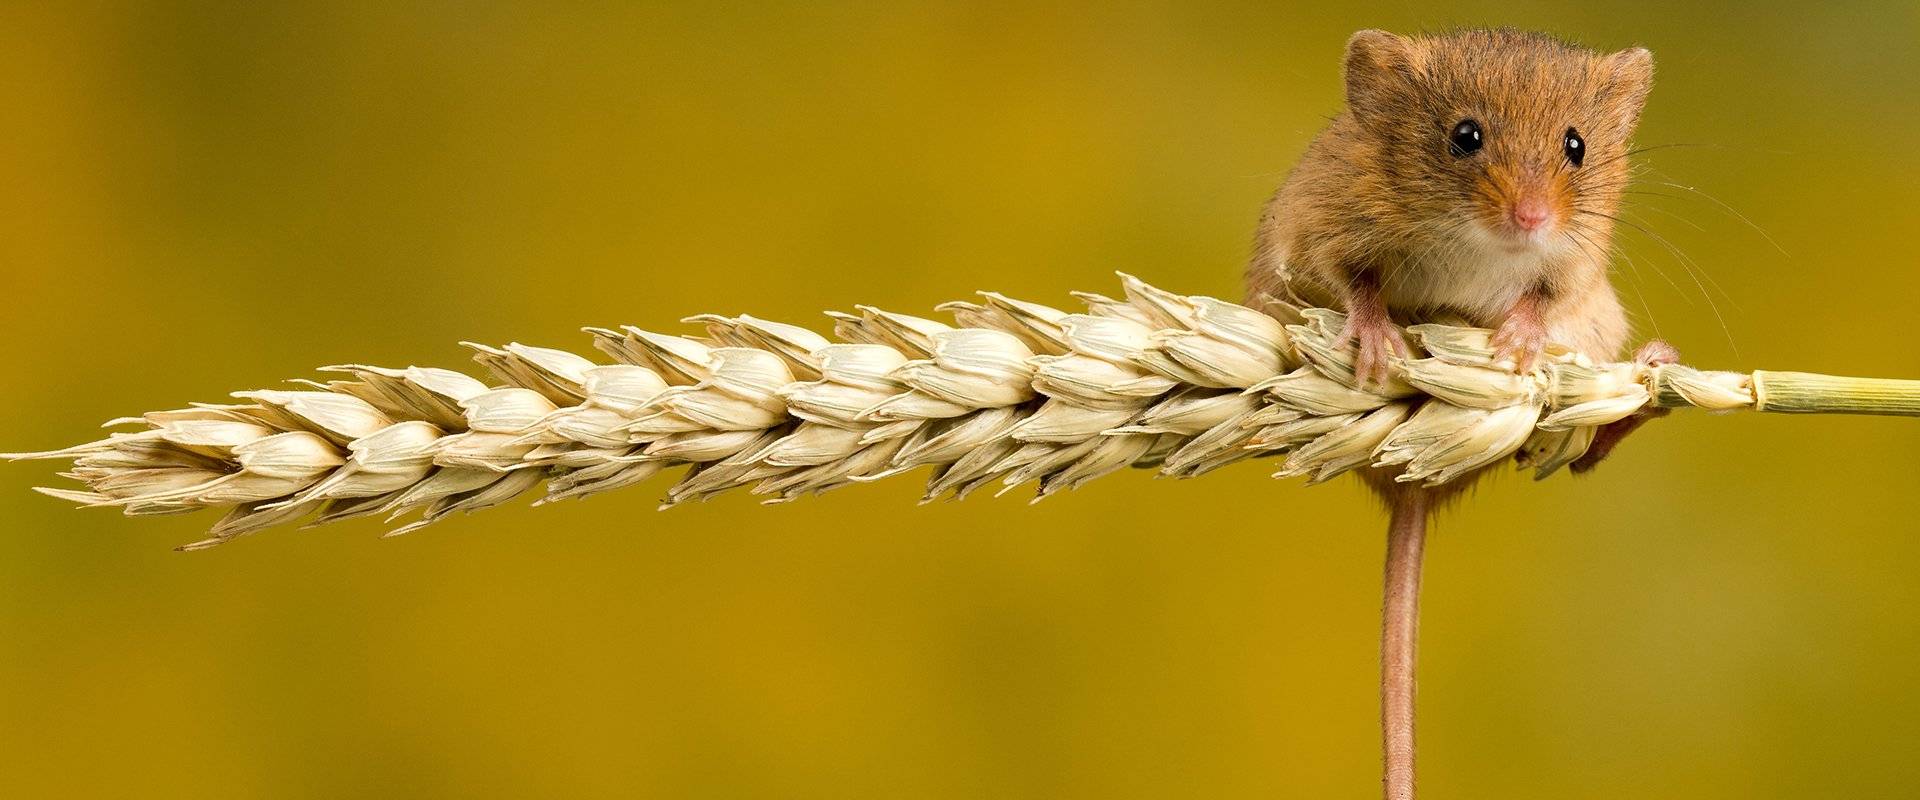 a field mouse on a piece of wheat